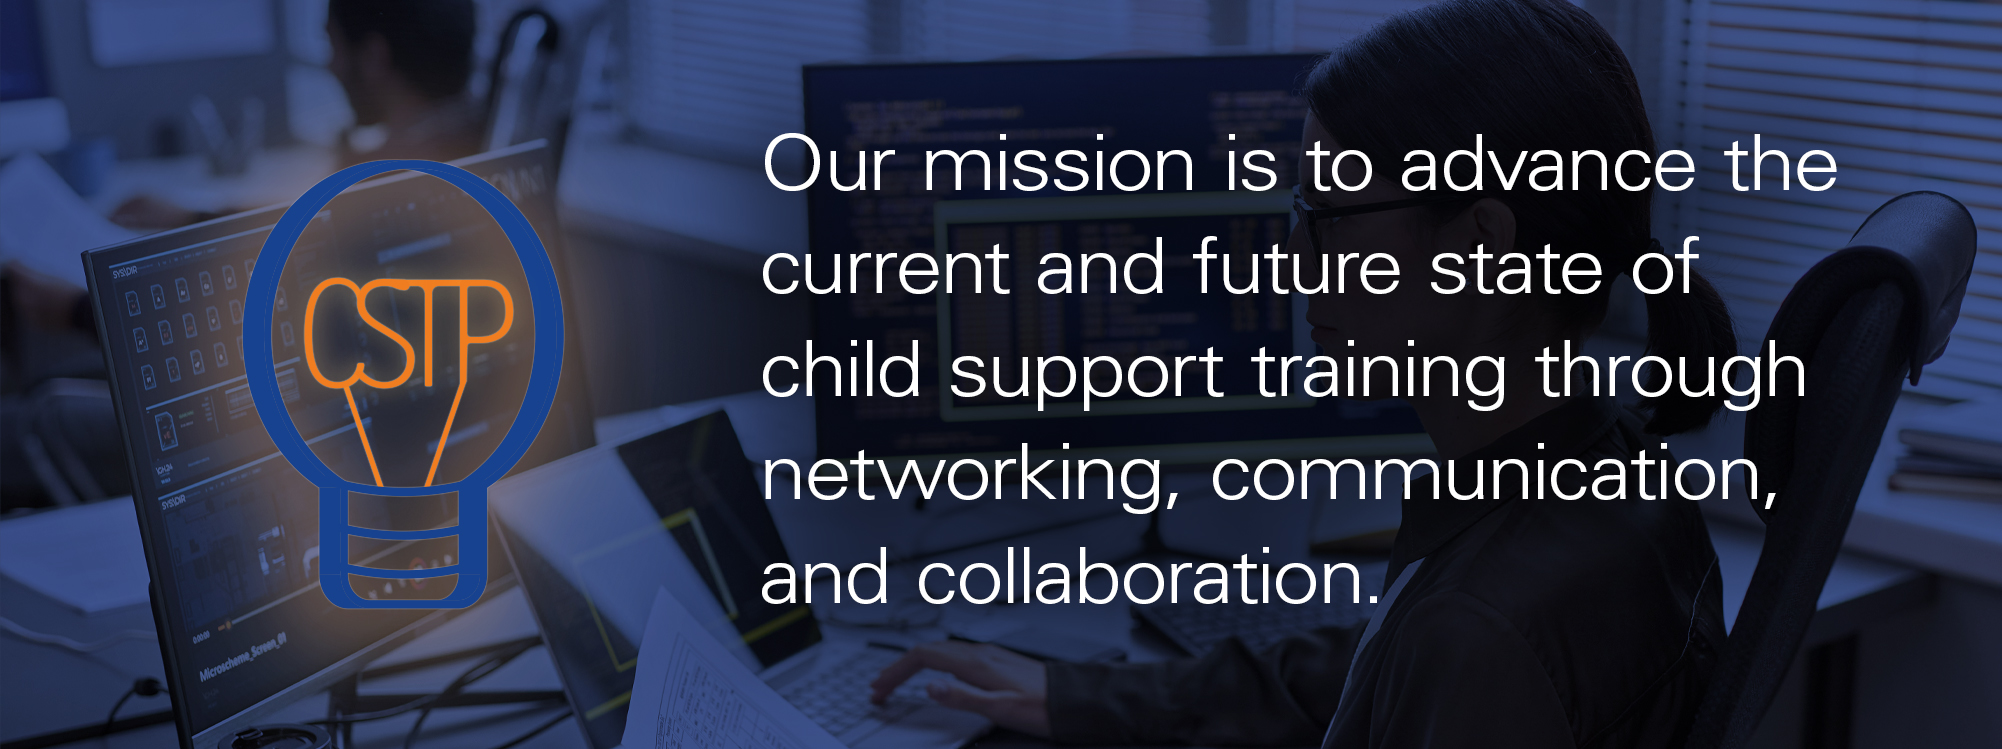 Our mission is to advance the current and future state of child support training through networking, communication, and collaboration.